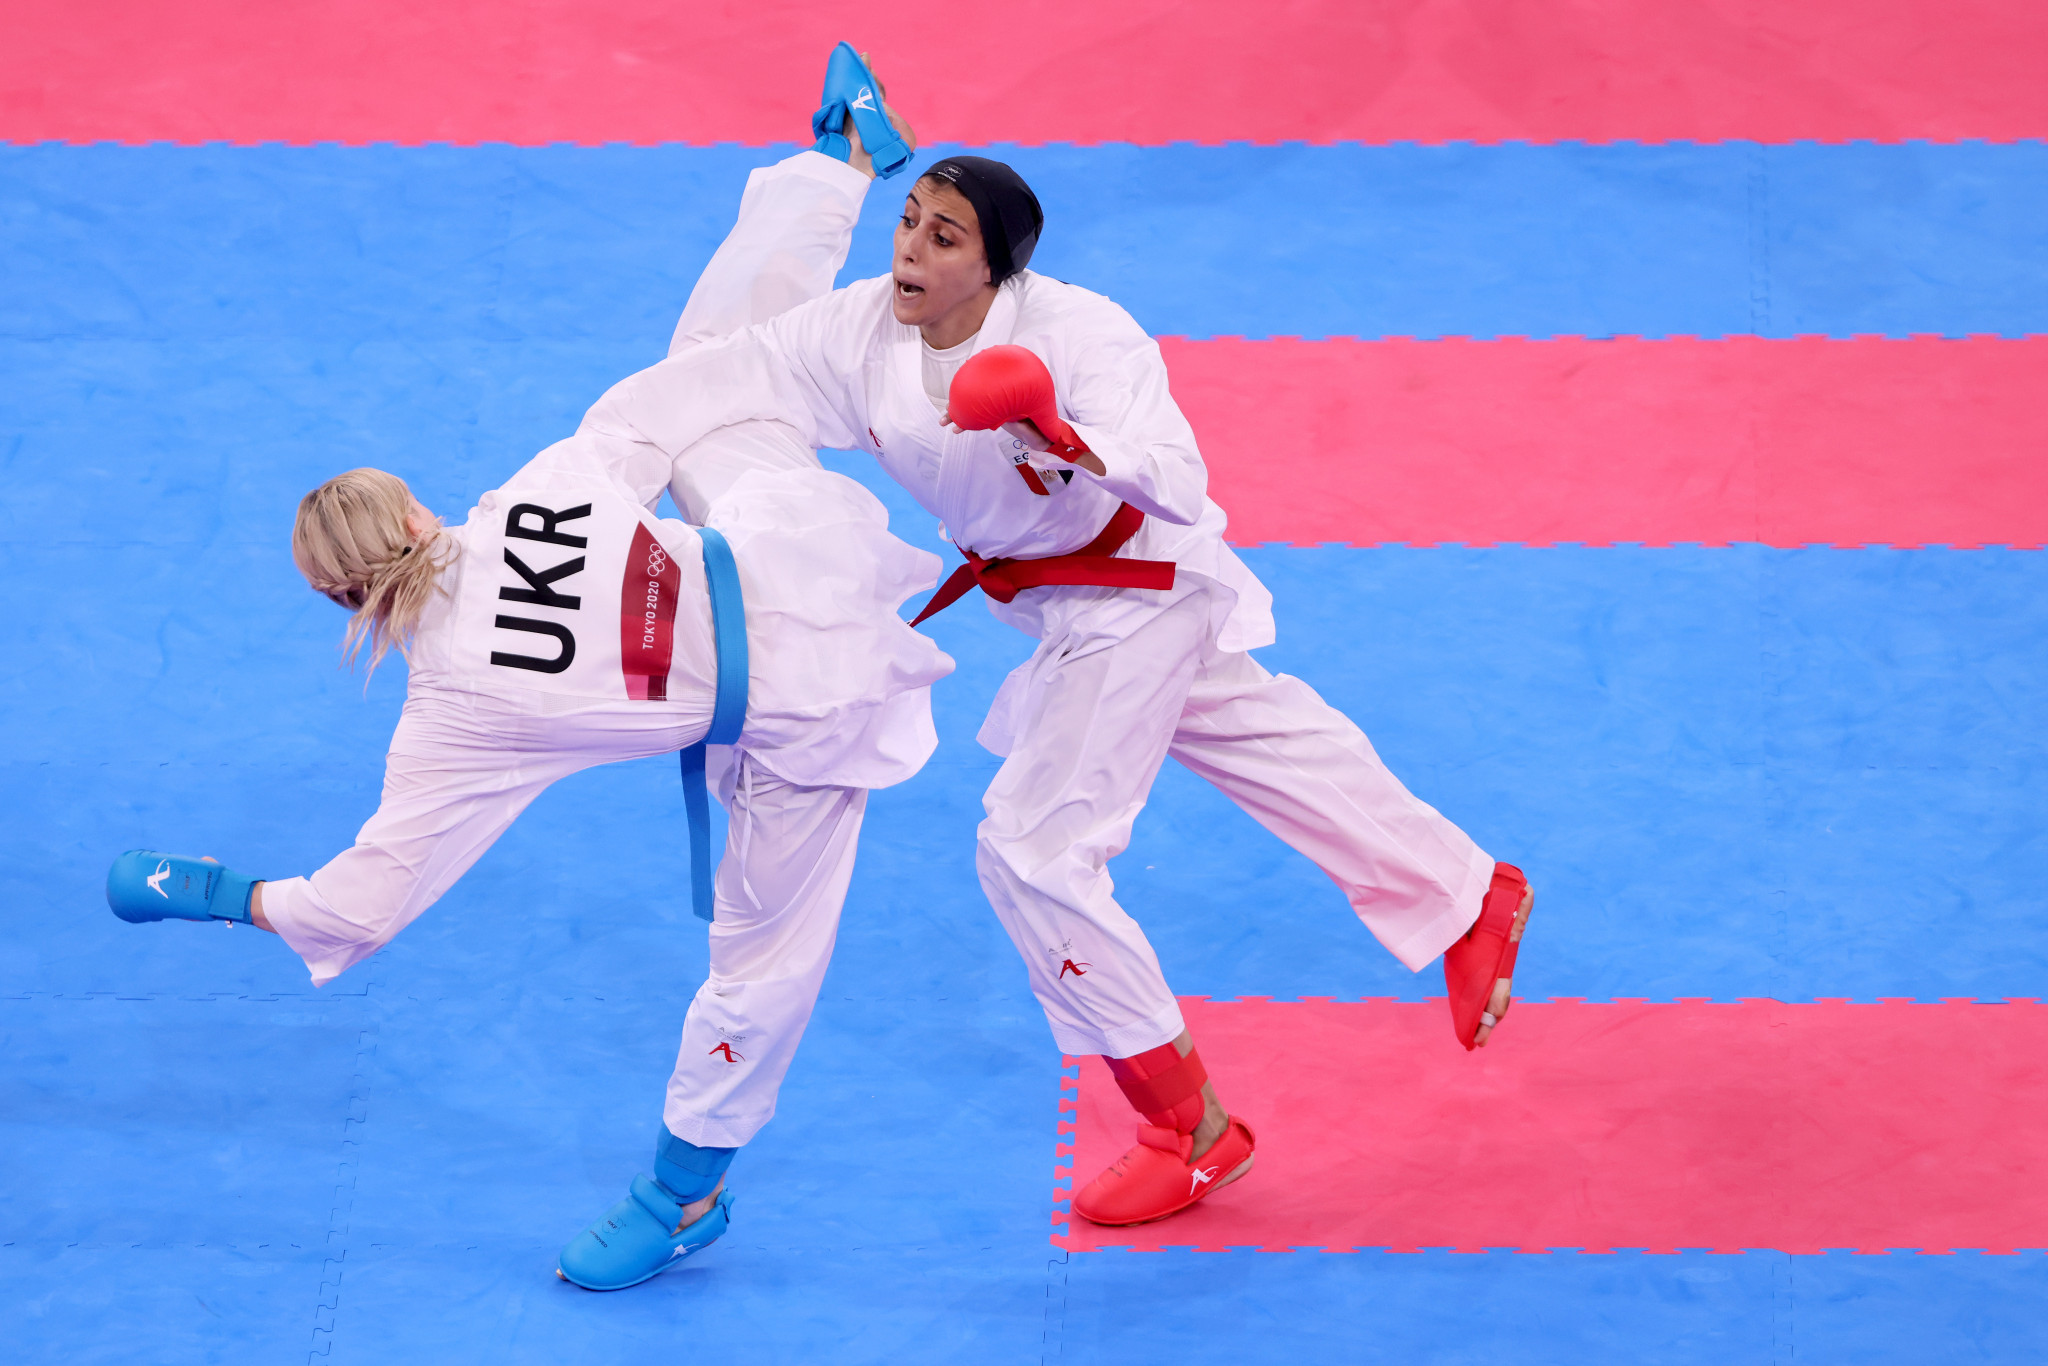 Ukraine had two karateka advance to gold medal-matches today in Konya ©Getty Images